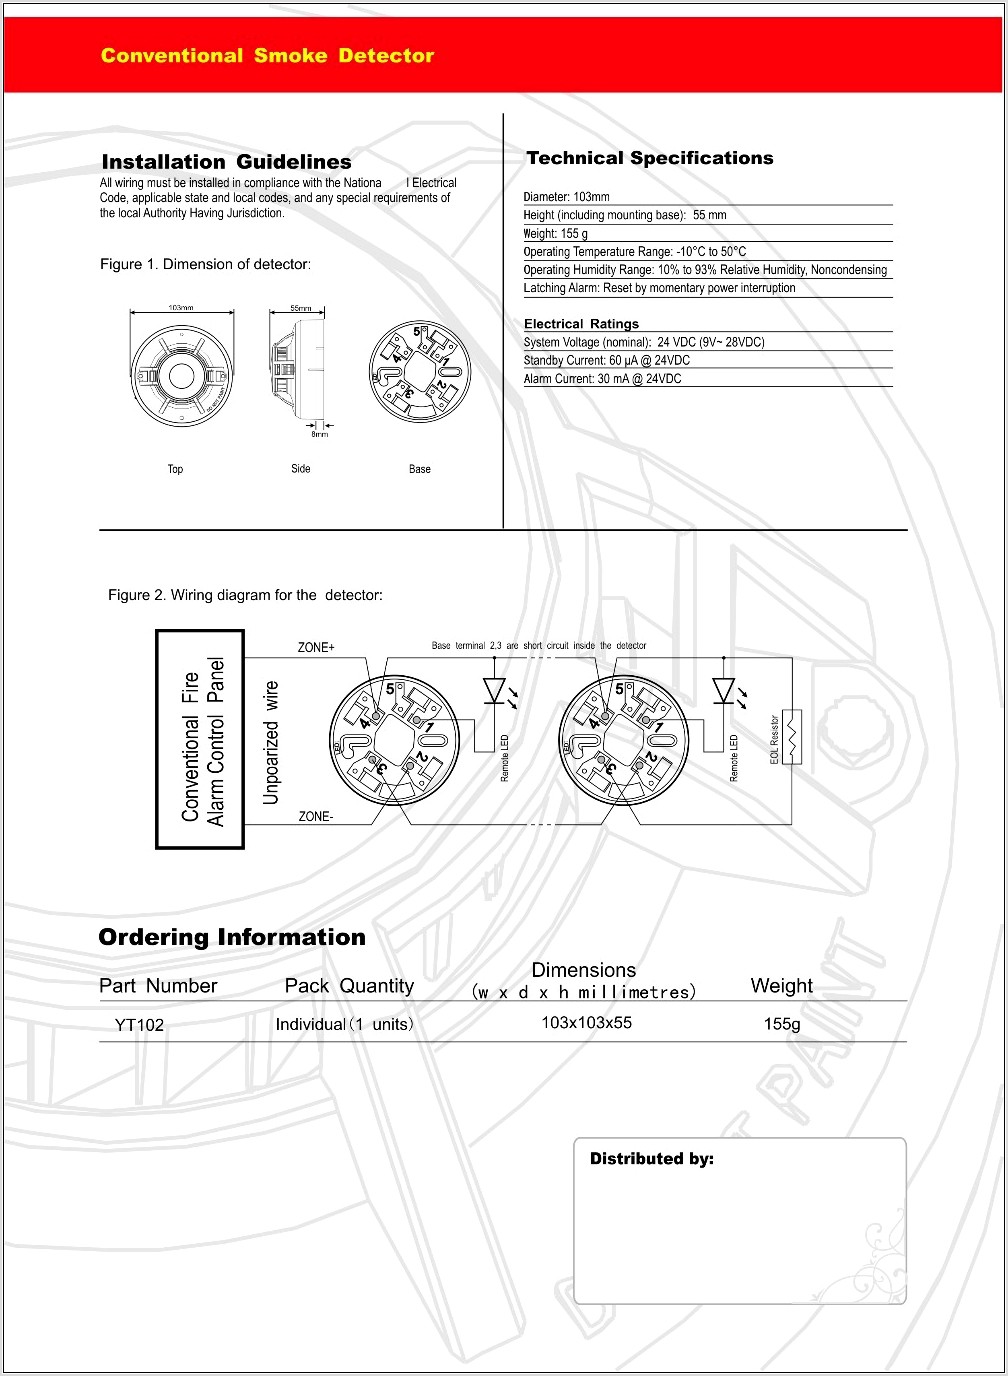 Hard Wired Smoke Detector Wiring Diagrams